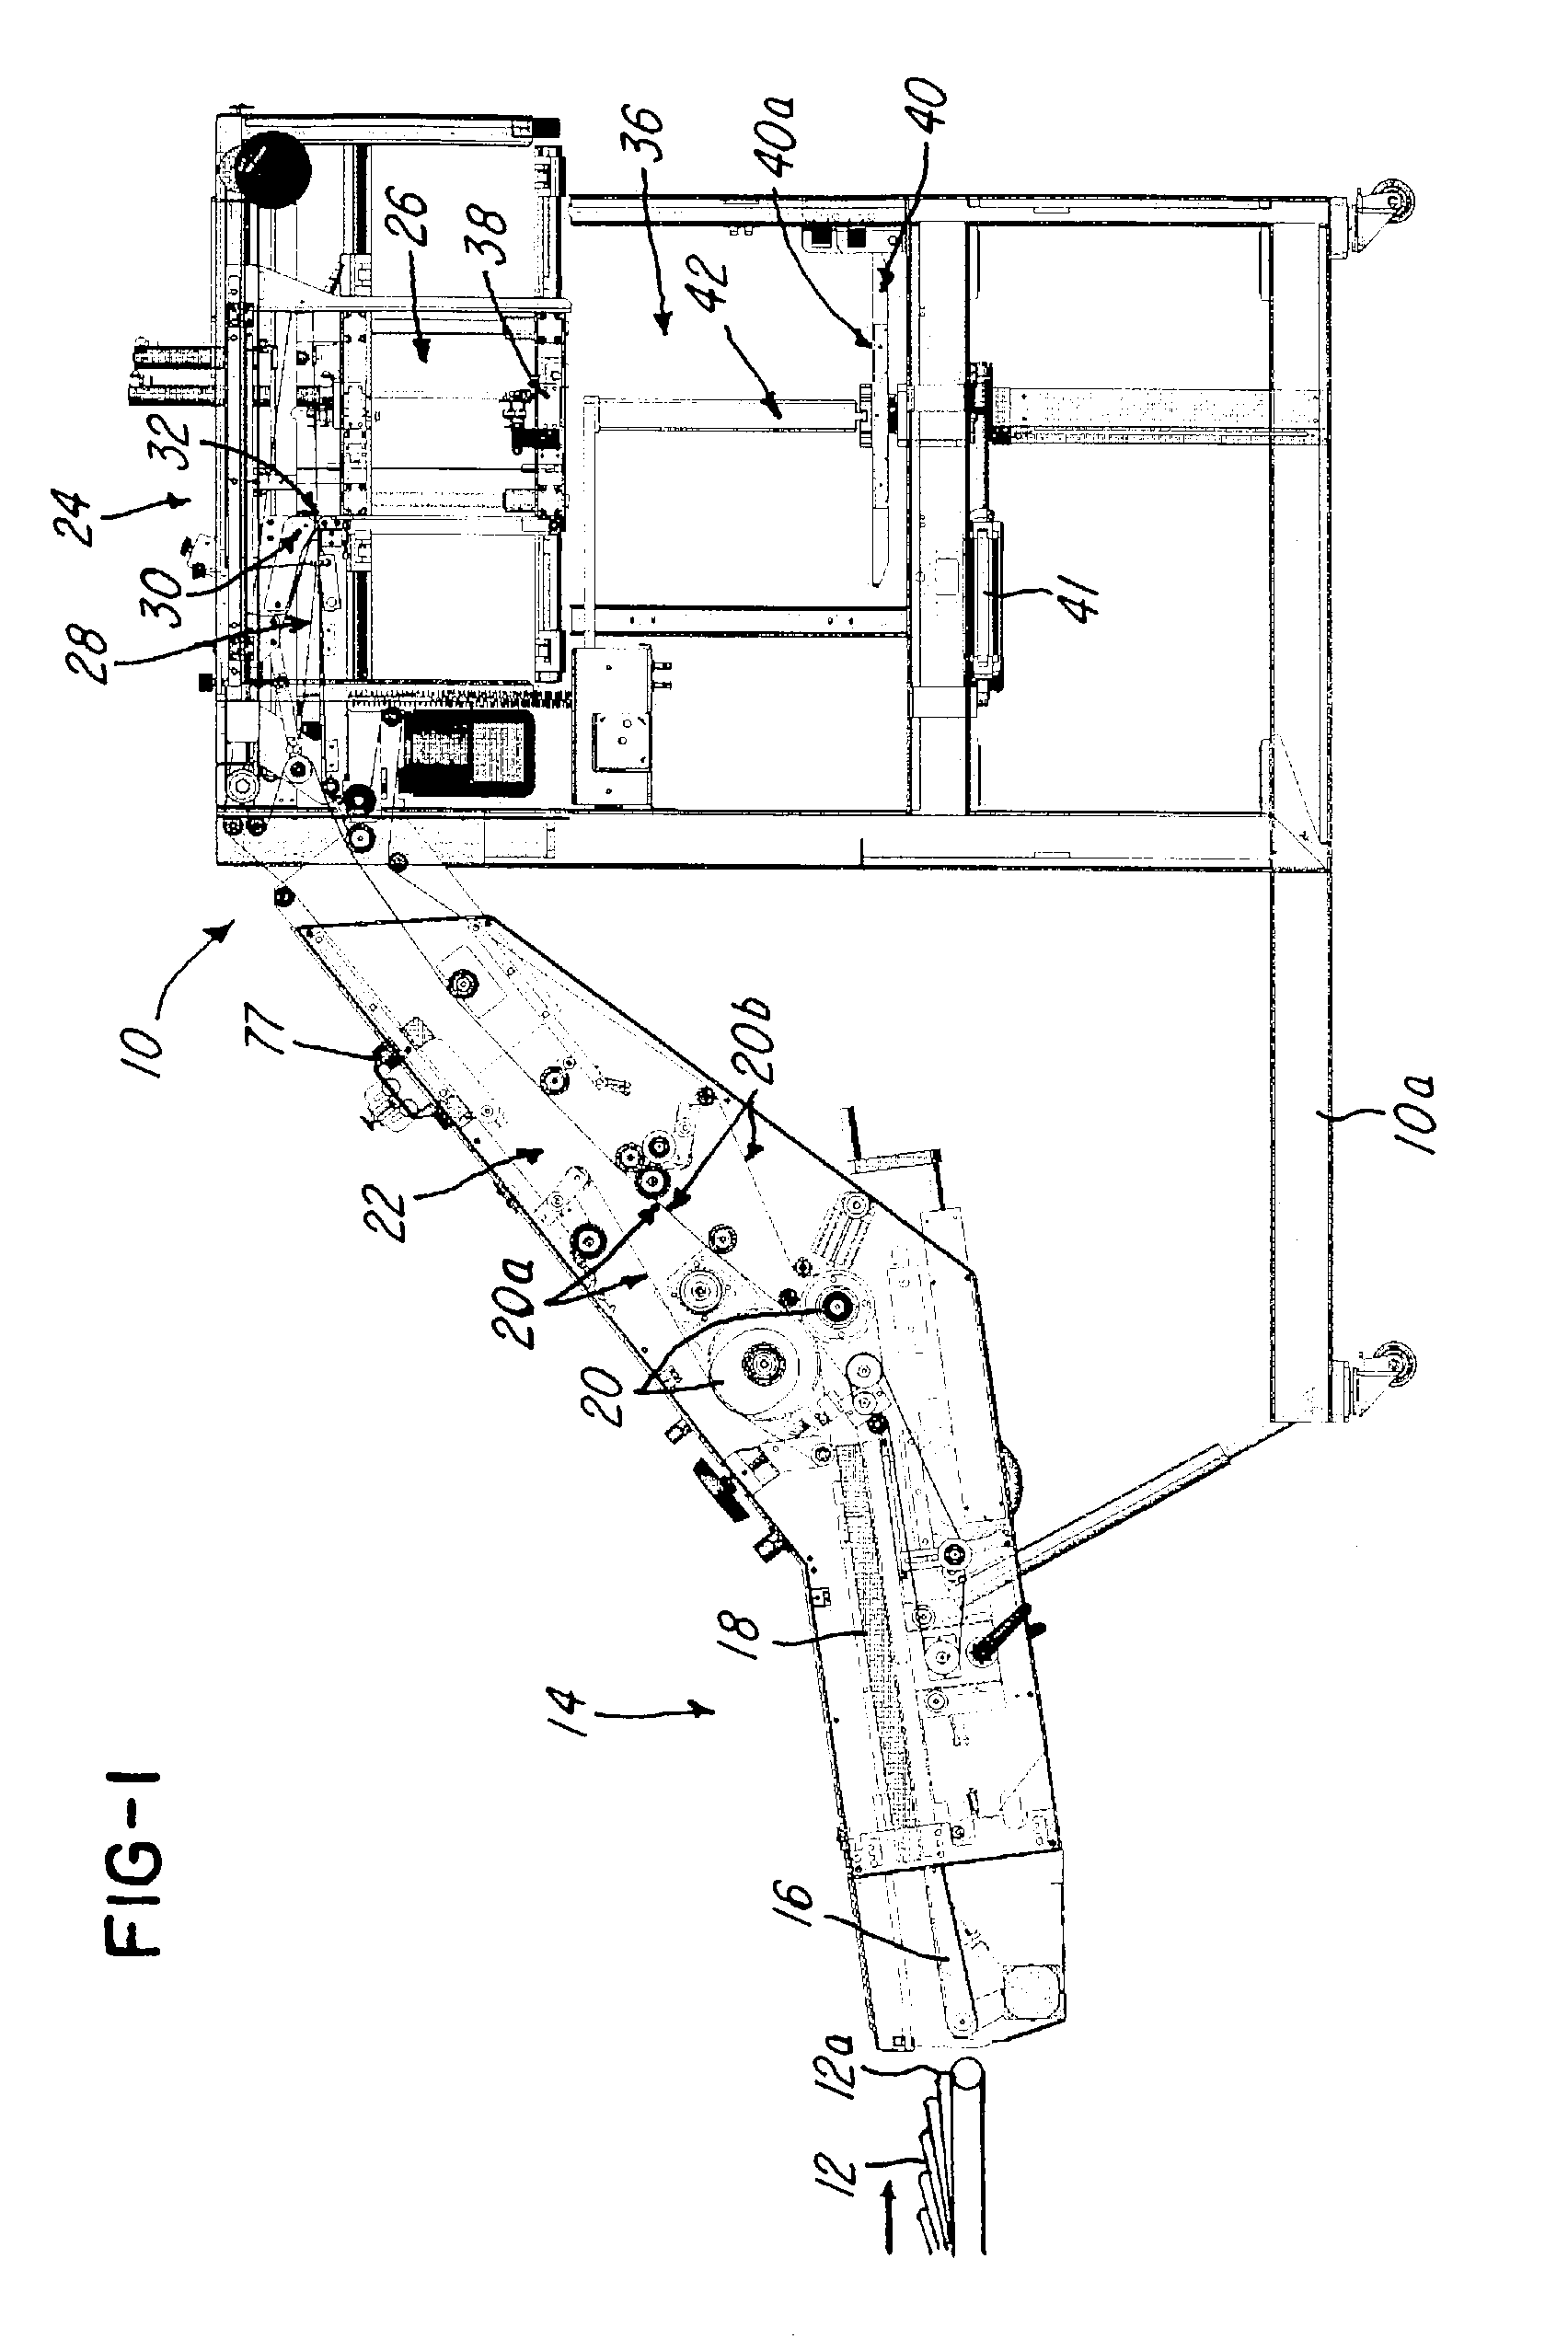 Stacker, stacking system or assembly and method for stacking